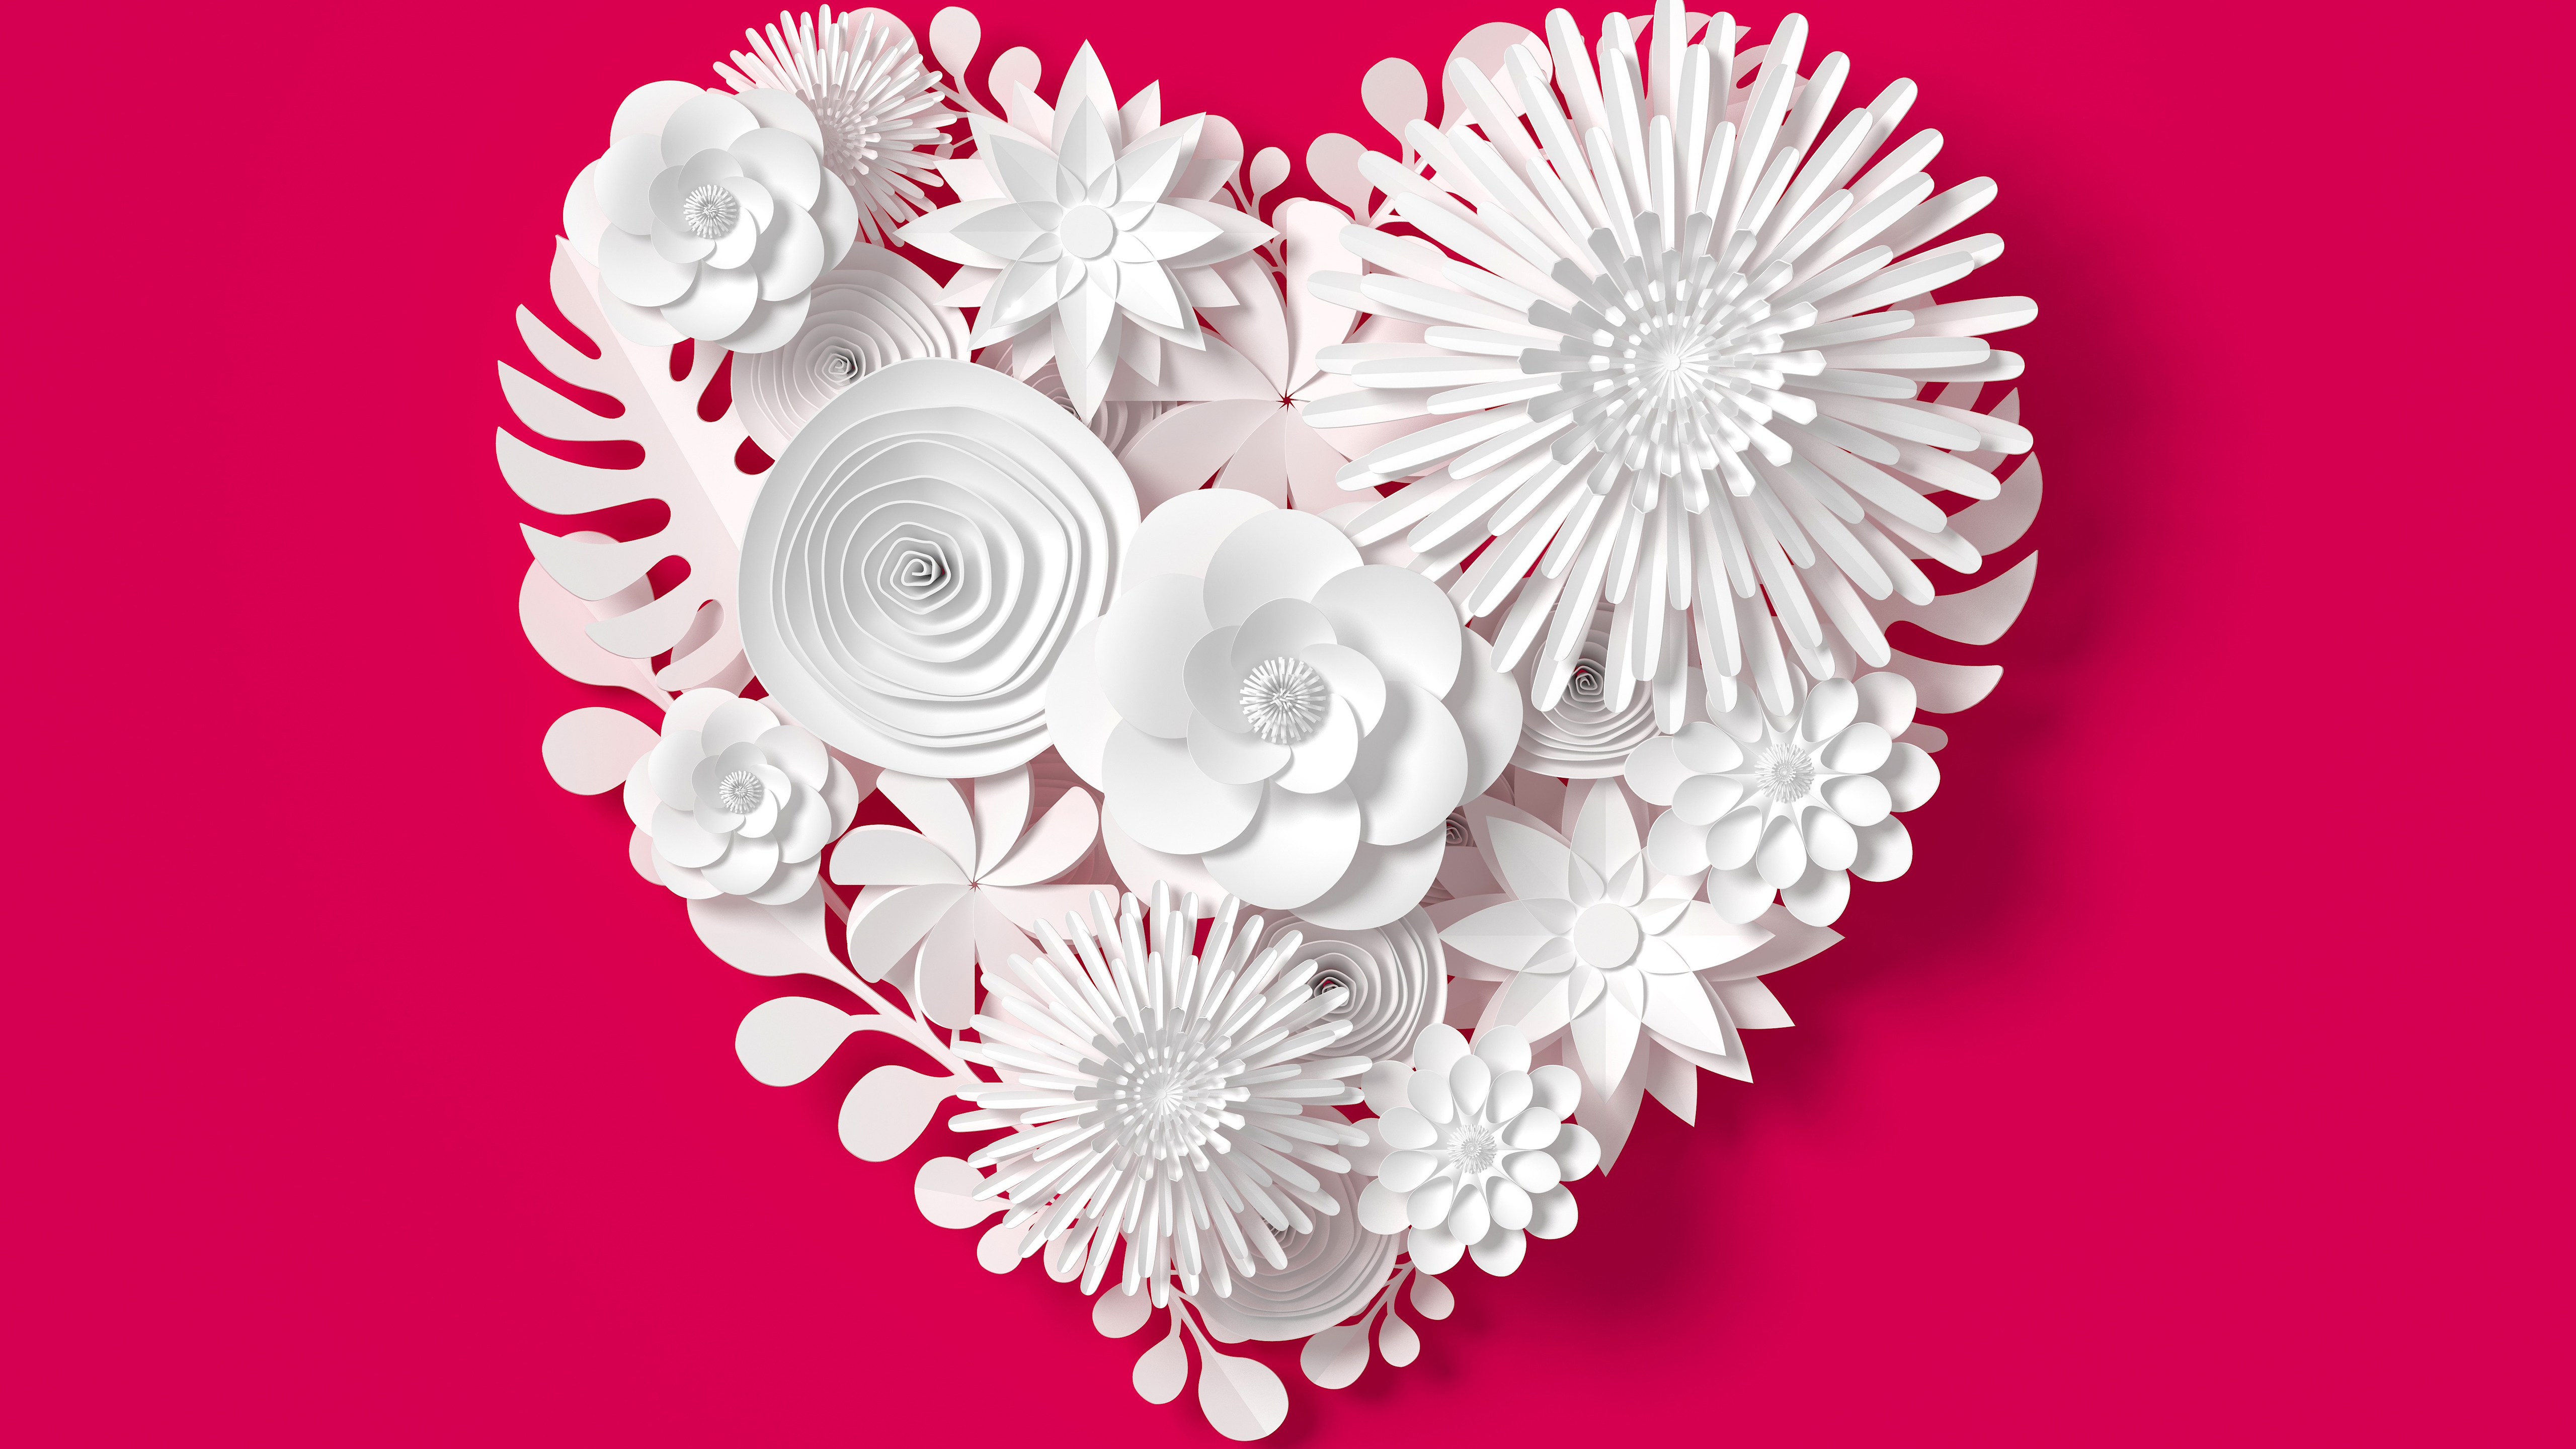 Heart Design Pink Background Abstract Paper Art 5120x2880